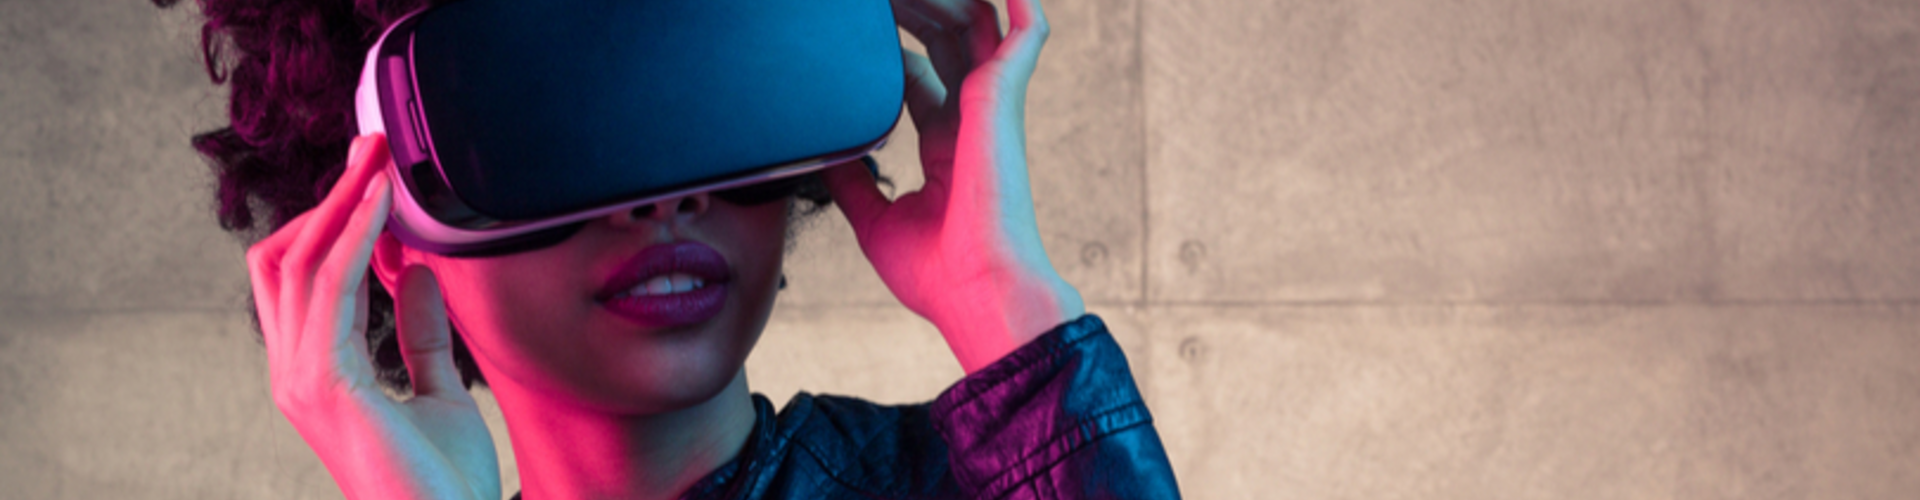 How companies are using virtual reality to develop employees' soft skills